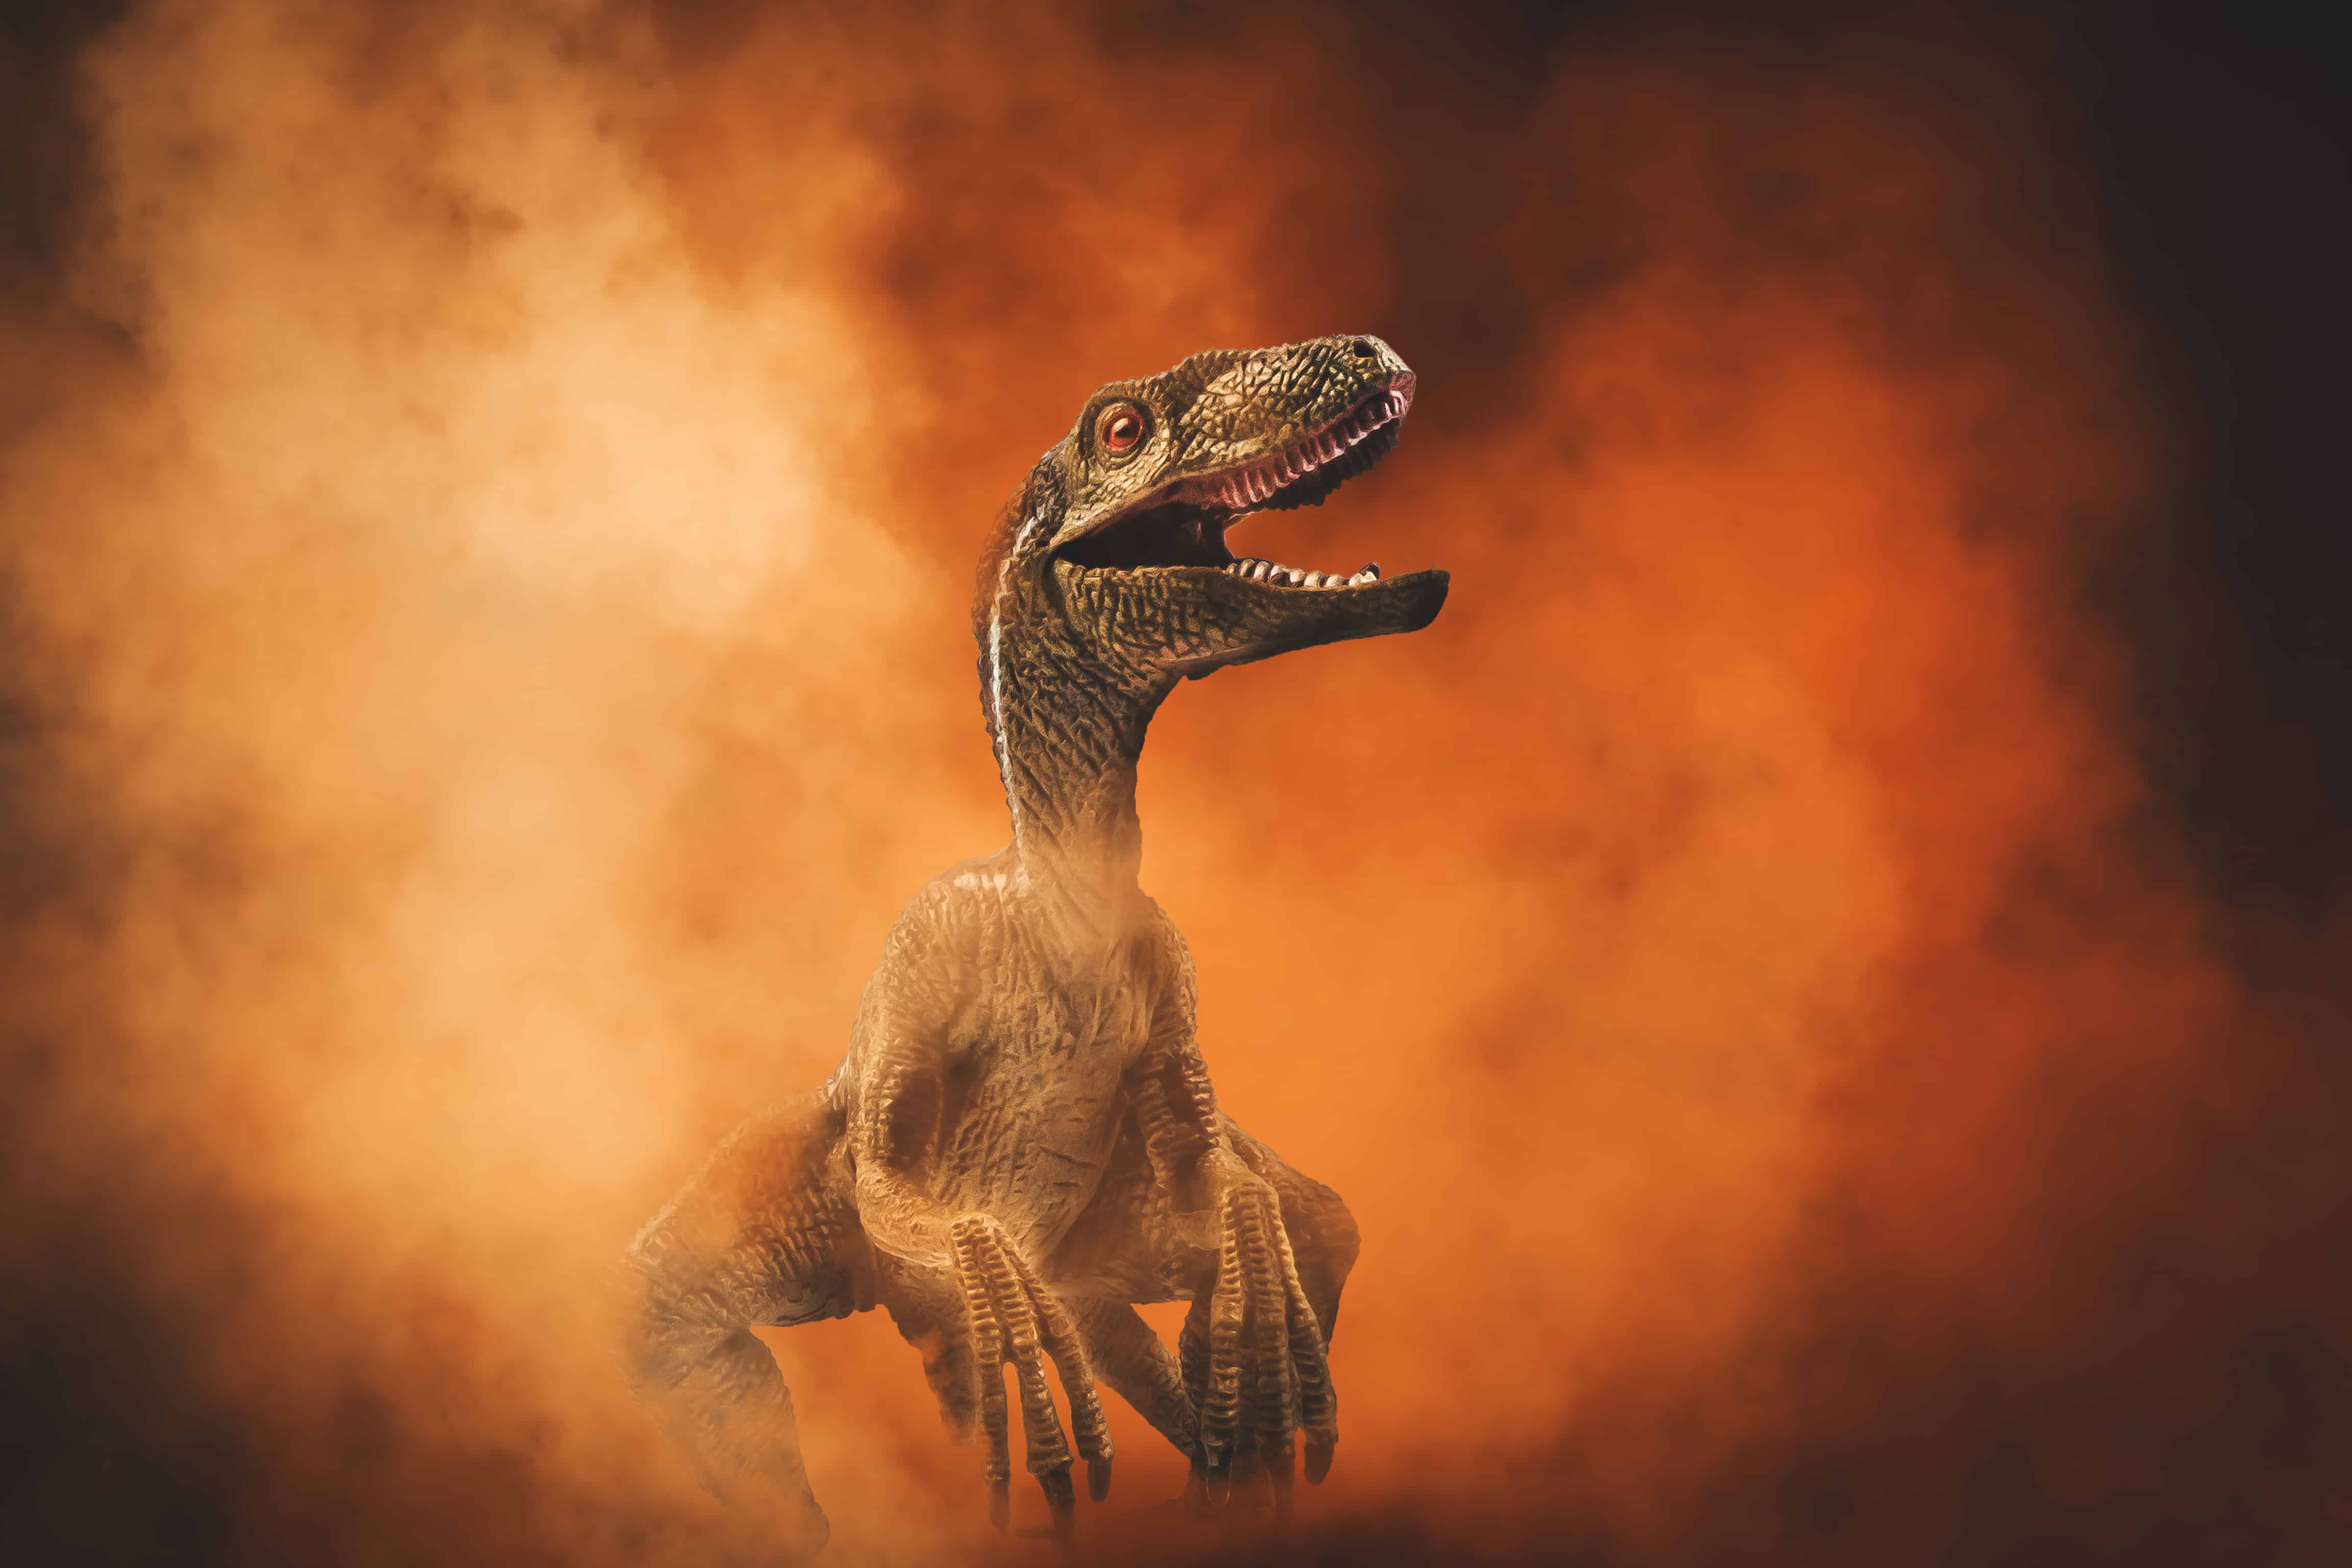 How the Raptors dino became cool again 